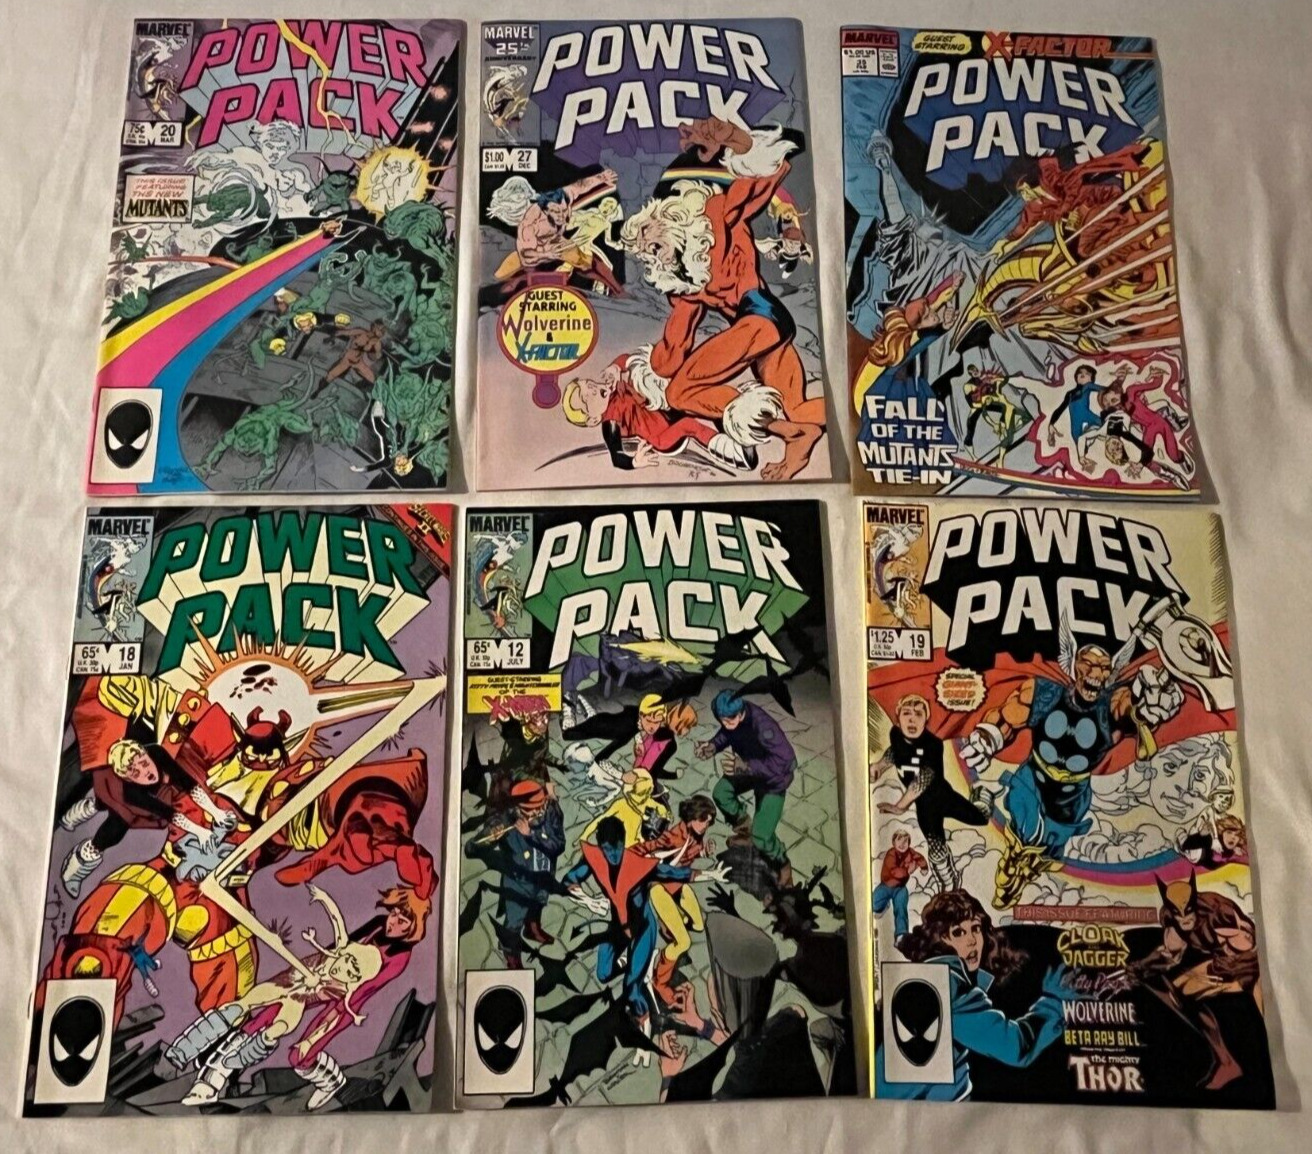 Power Pack Marvel Comics Lot of 6 issues #12, 18, 19, 20, 27, 35